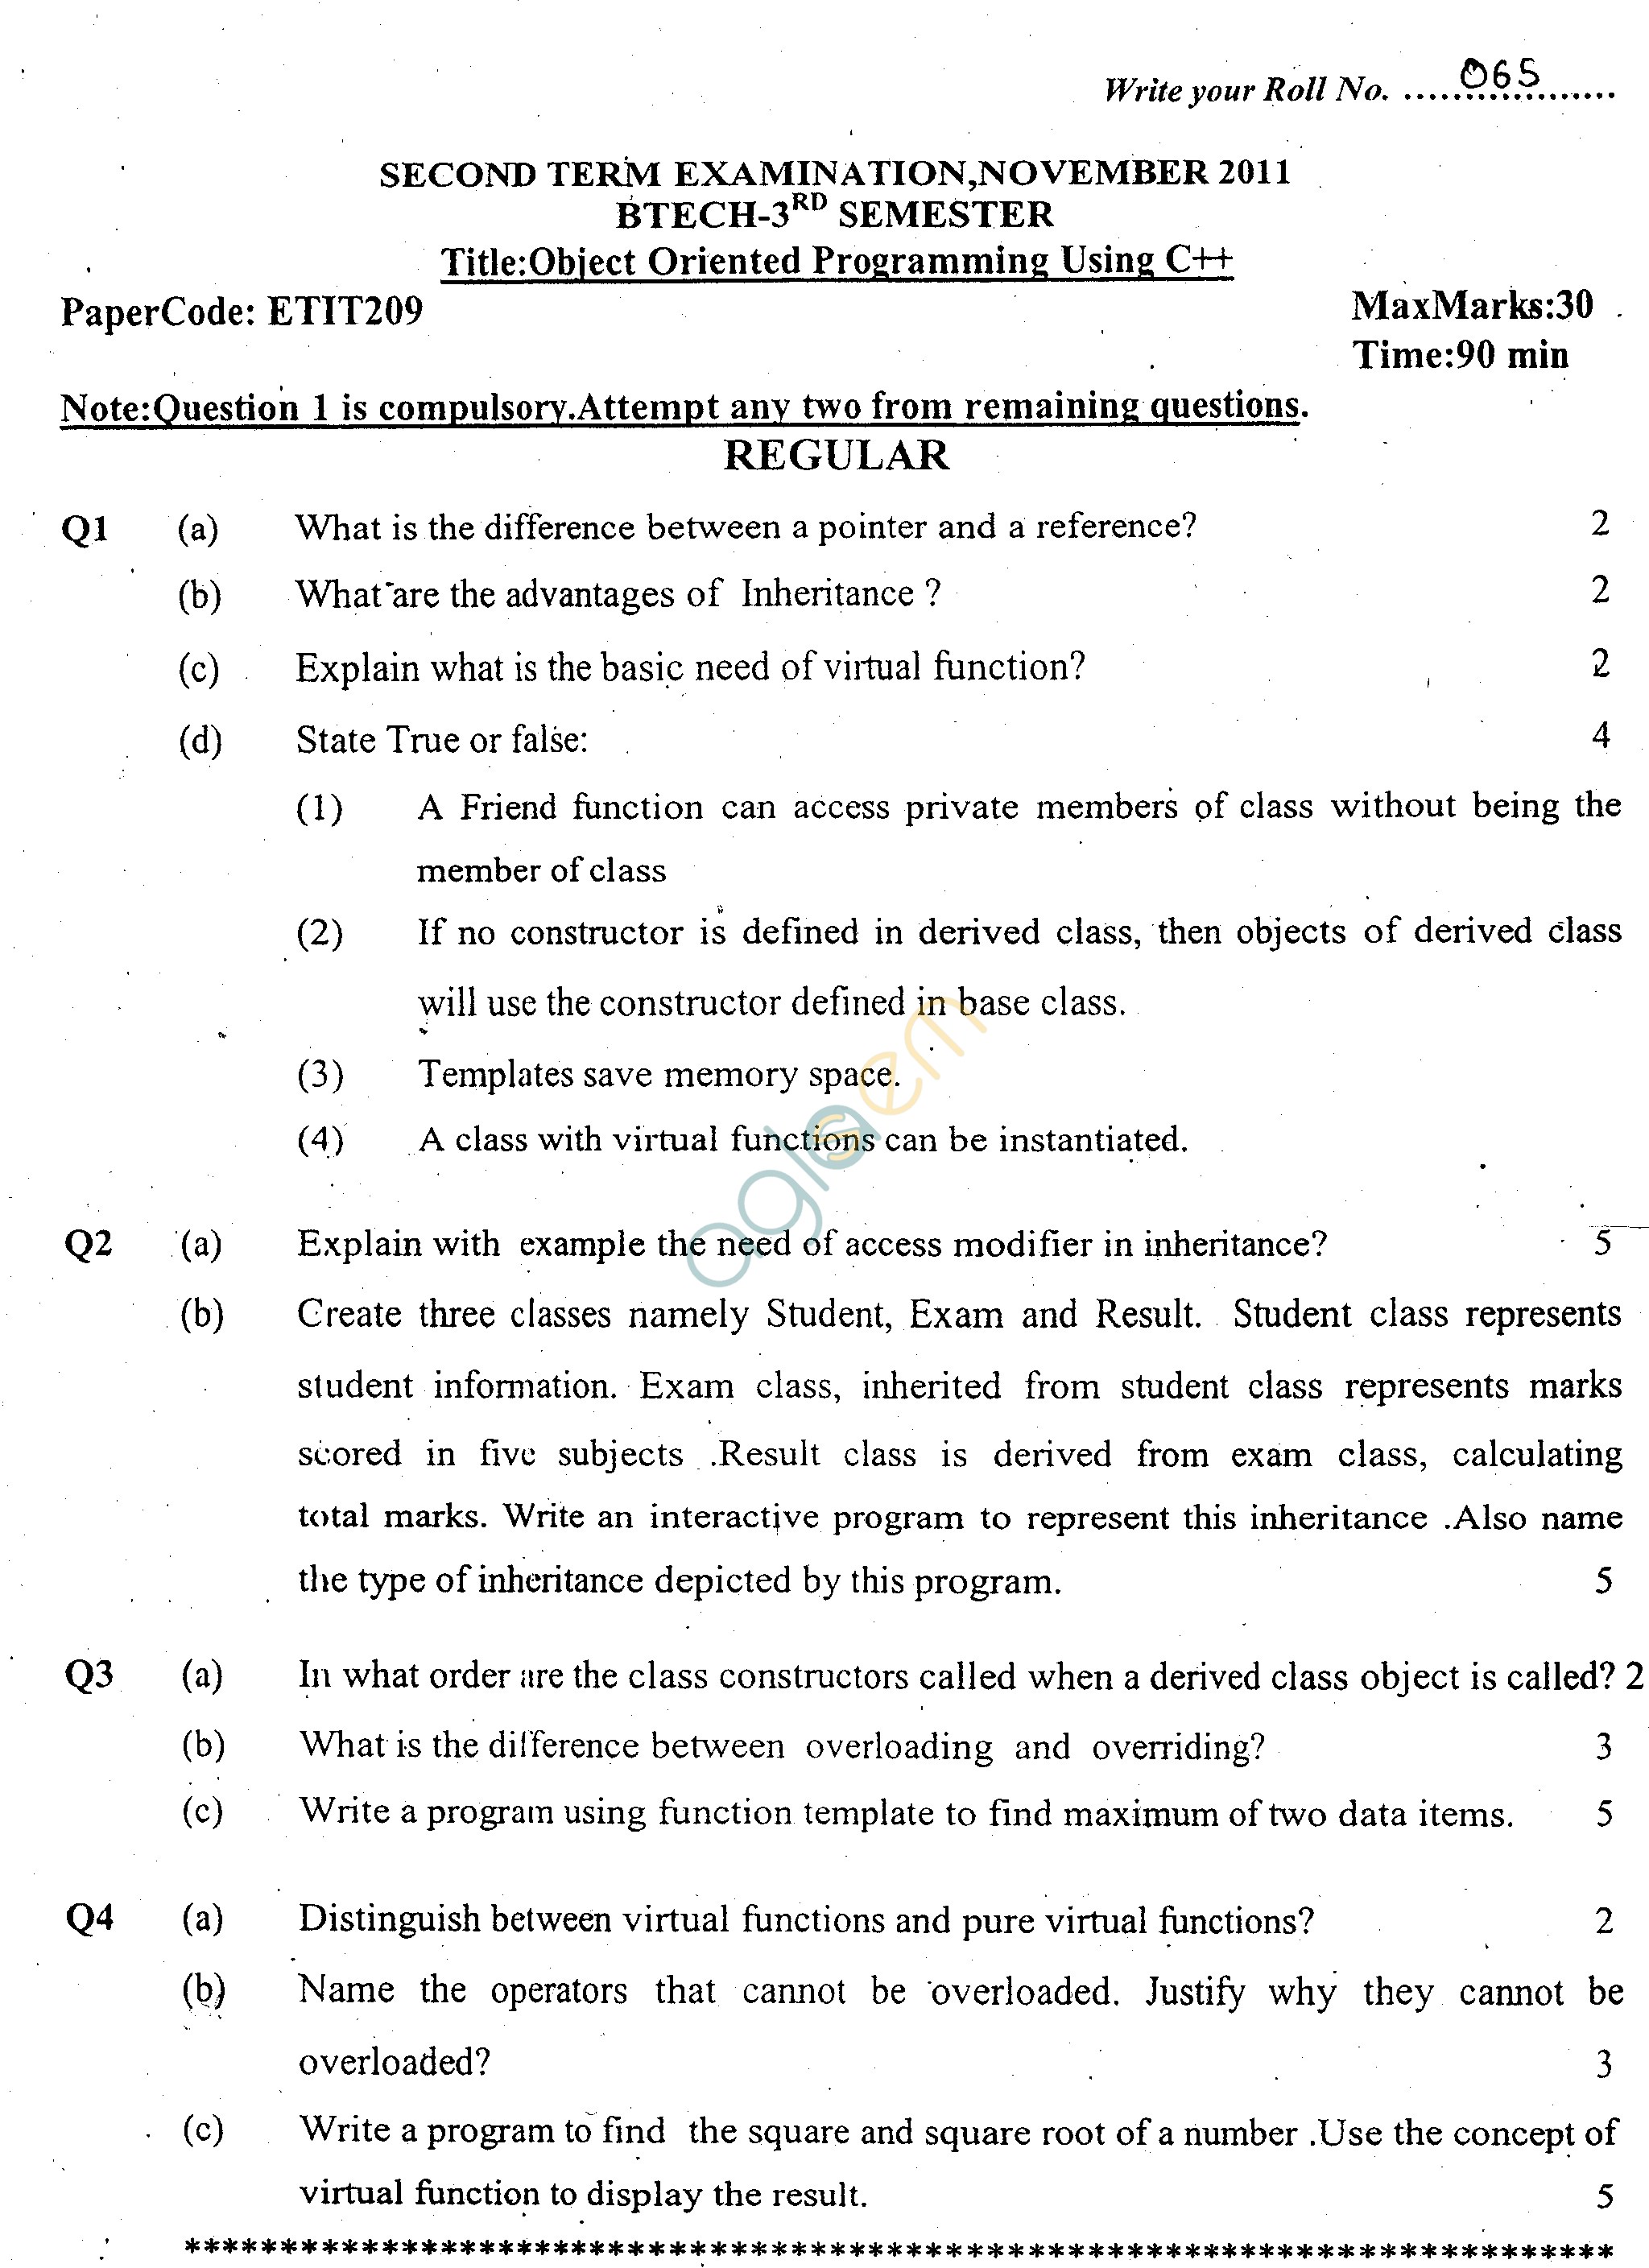 GGSIPU Question Papers Third Semester  Second Term 2011  ETIT-209